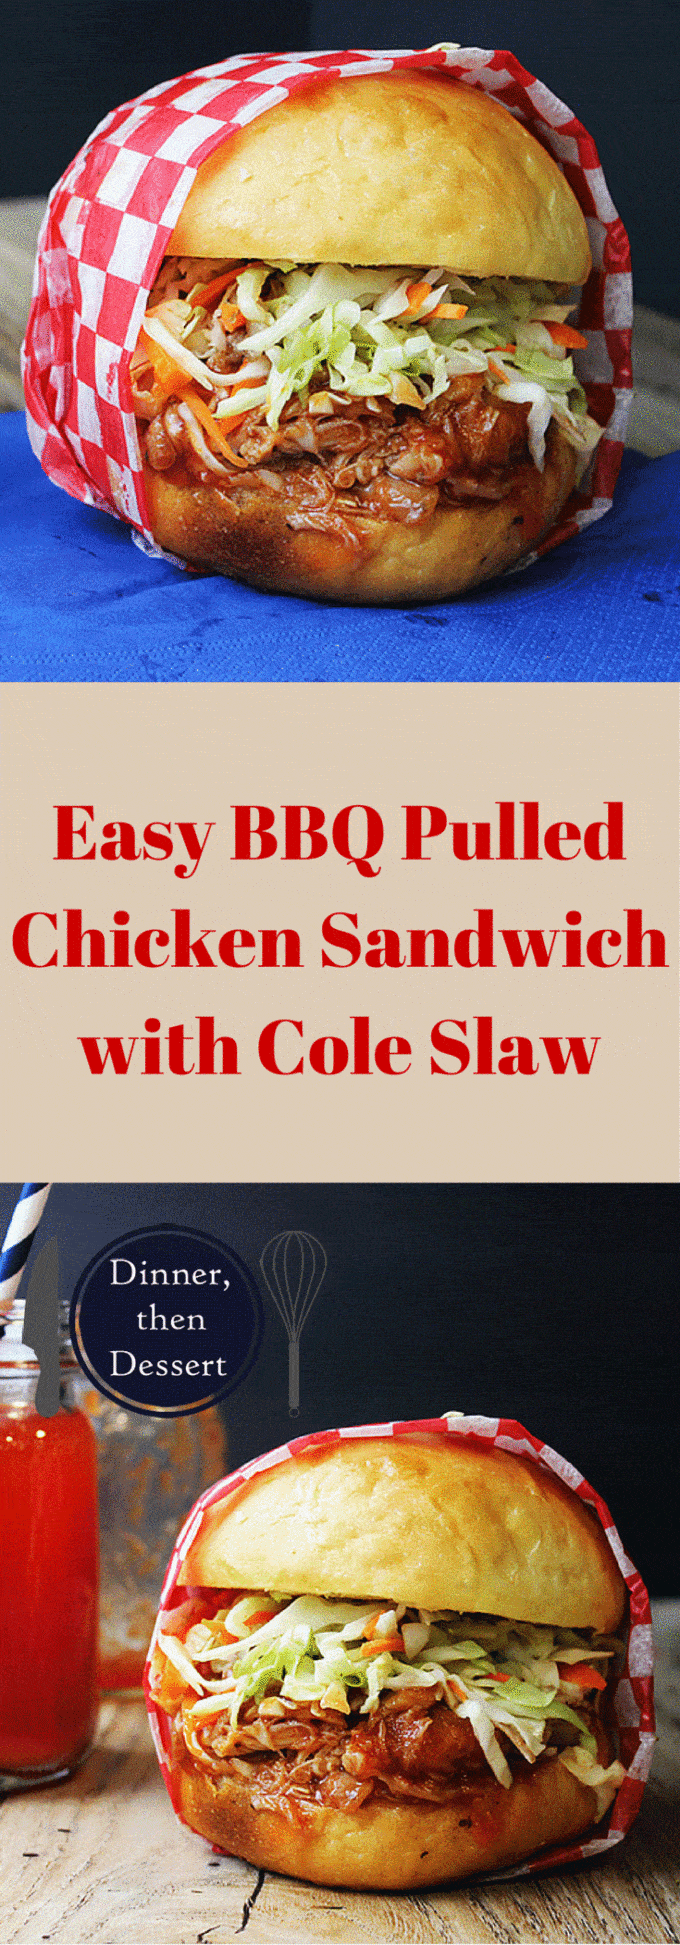 Sweet and Tangy Pulled BBQ Chicken Sandwich topped with Cole Slaw. A perfect meal for your 4th of July BBQ!